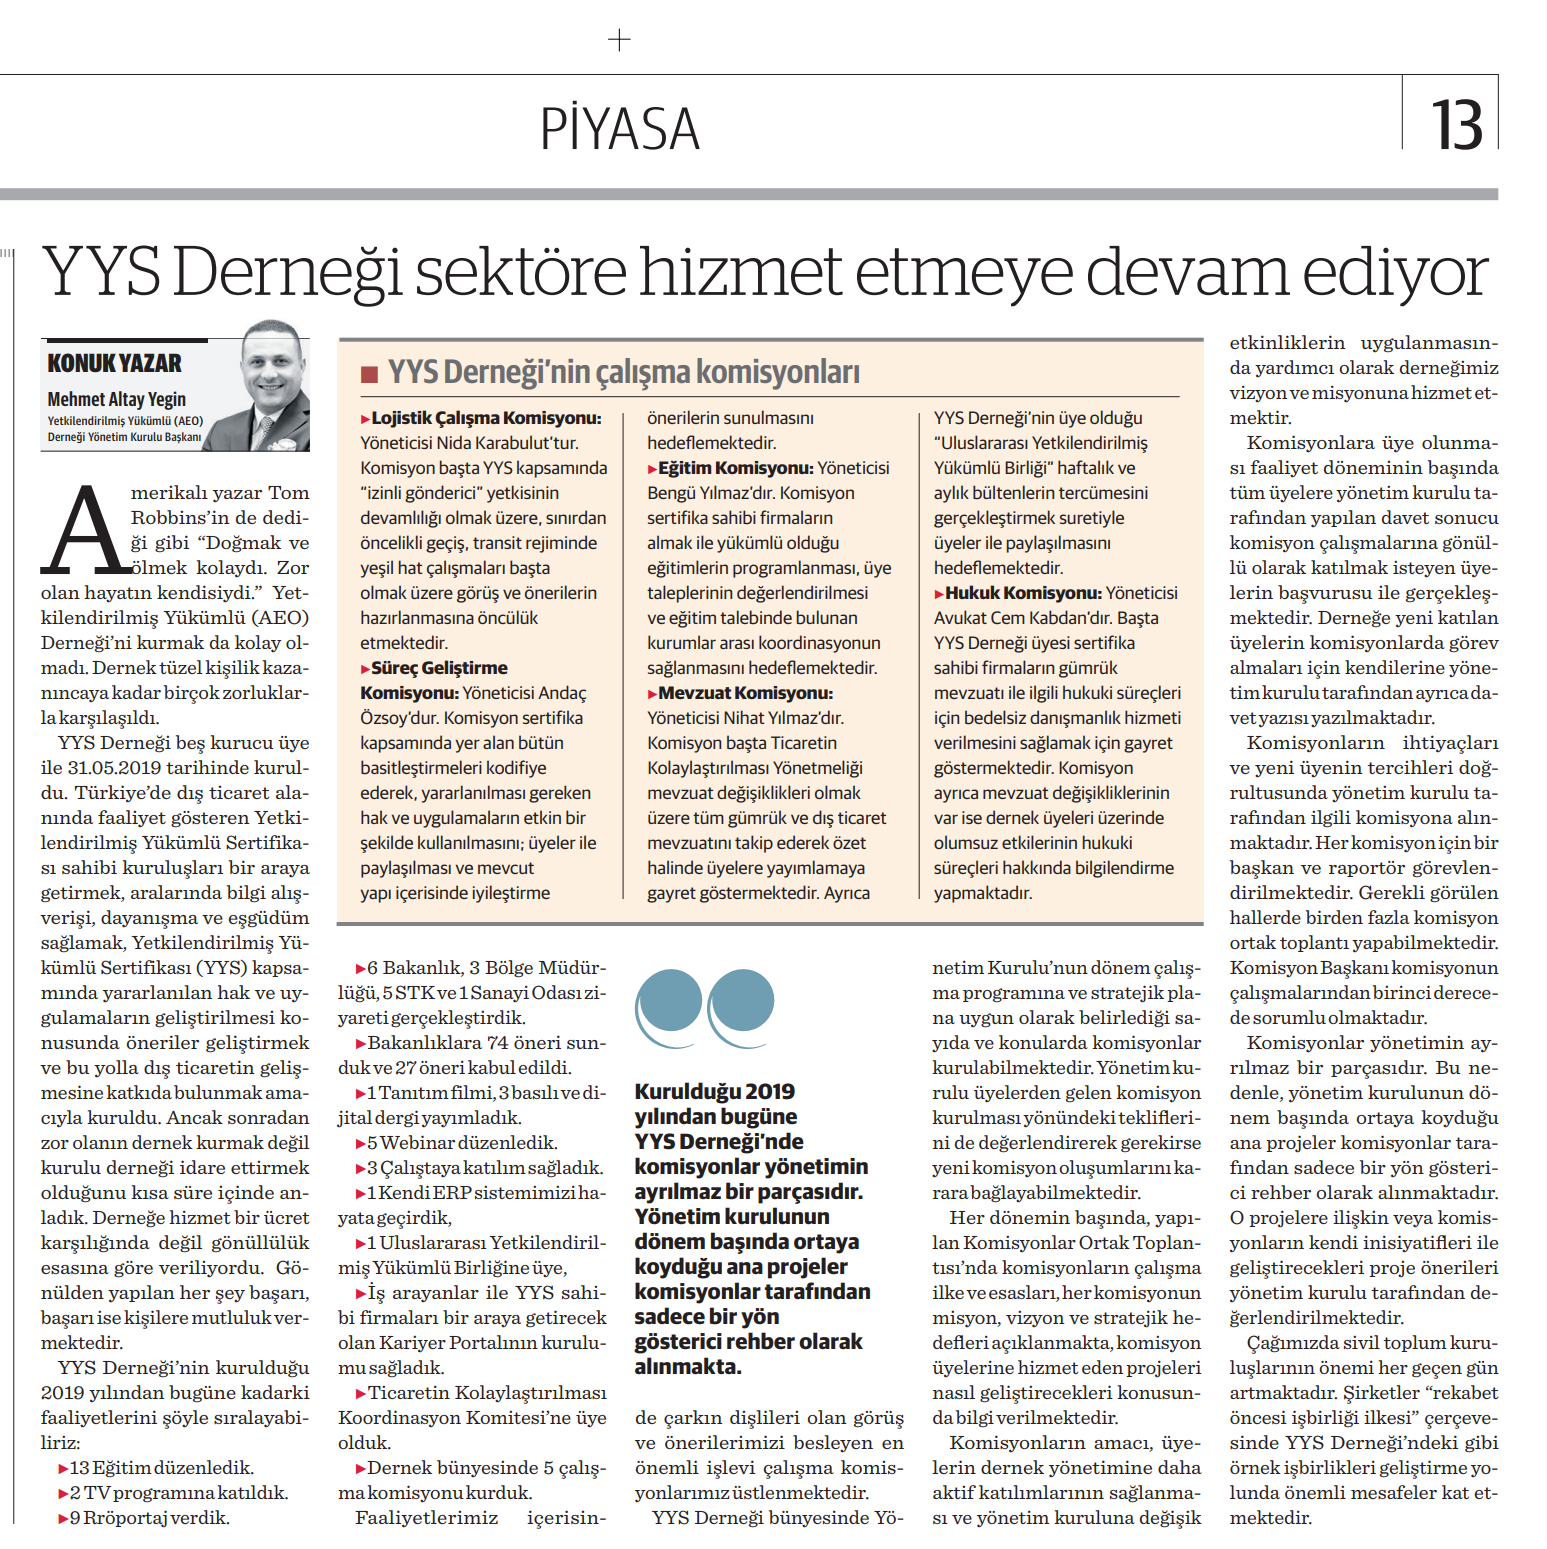 The article written by Mehmet Altay YEGİN, our Chairman of the Board of Directors, titled YYS Association continues to serve the sector, was published in the newspaper Nasıl Bir Ekonomi.